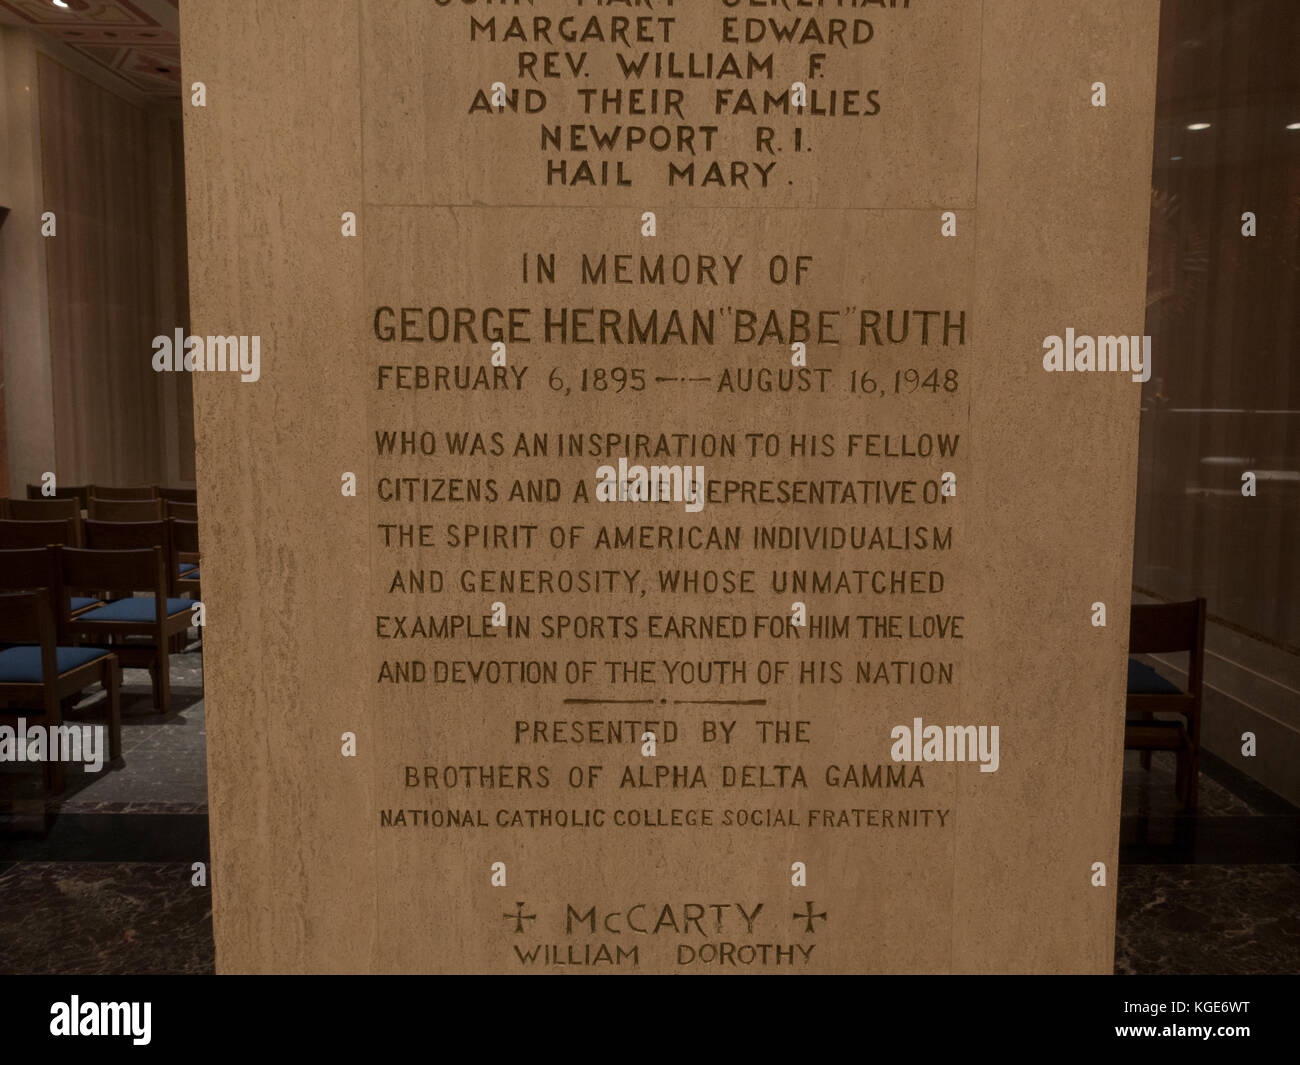 Memorial plaque to Babe Ruth in Memorial Hall, Basilica of the National Shrine of the Immaculate Conception, Washington DC, United States. Stock Photo